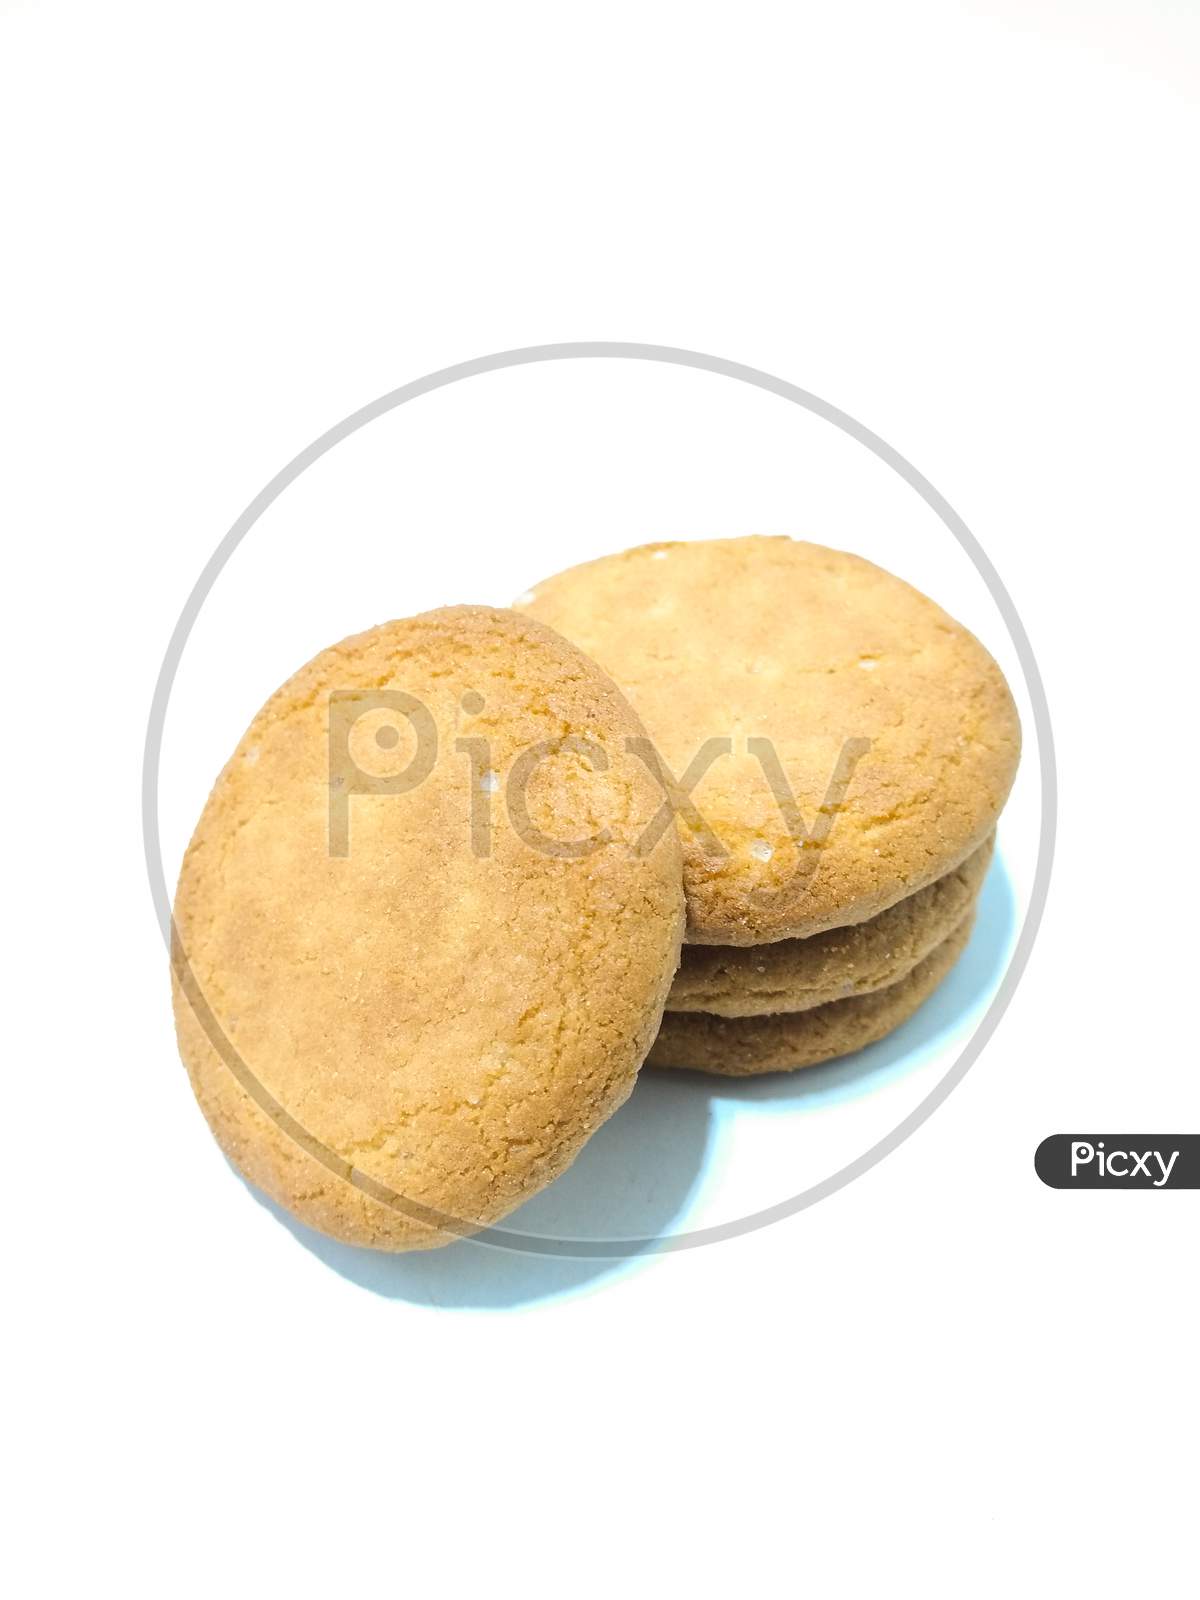 A picture of biscuits